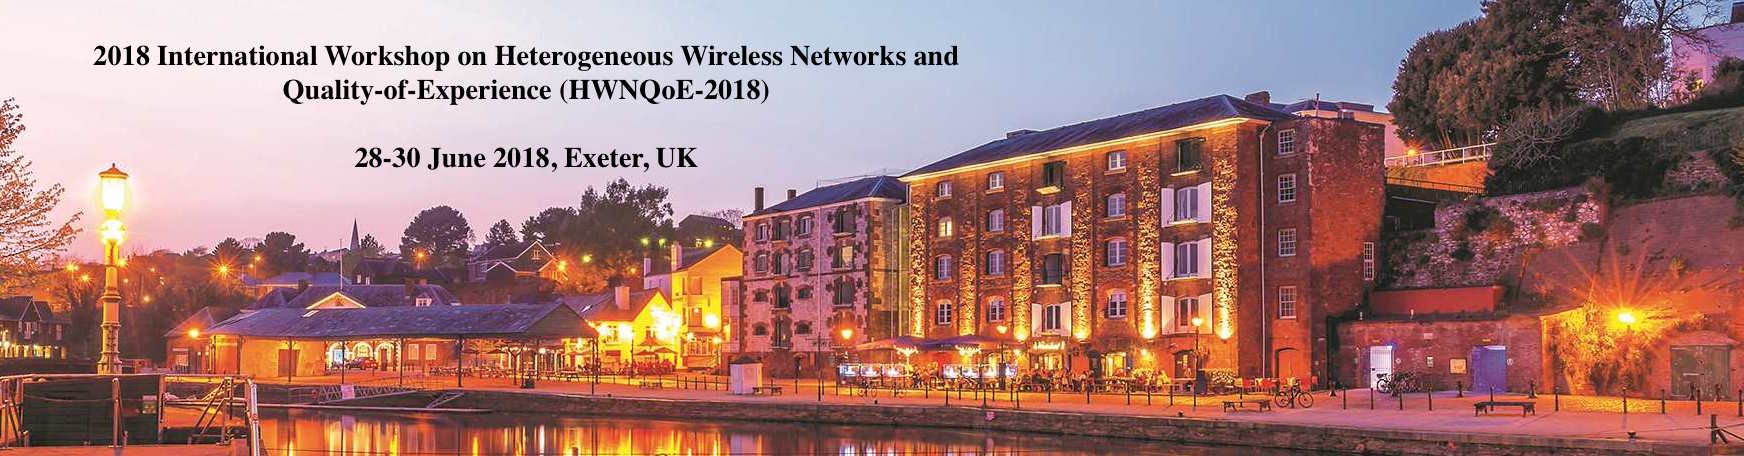 Workshop on Heterogeneous Wireless Networks and Quality-of-Experience (HWNQoE))